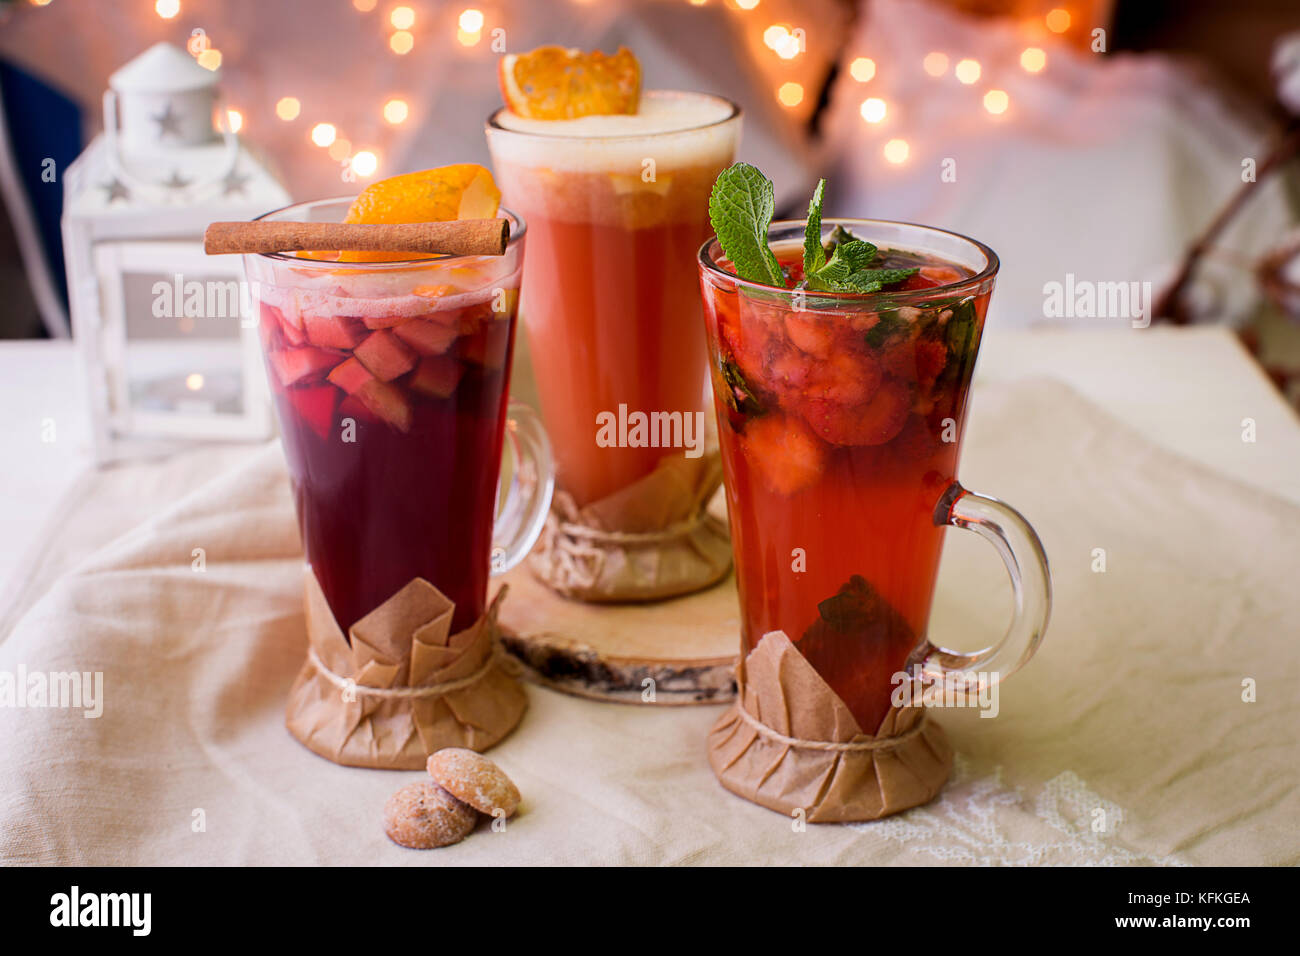 Delicious sweet drinks for Christmas party Stock Photo